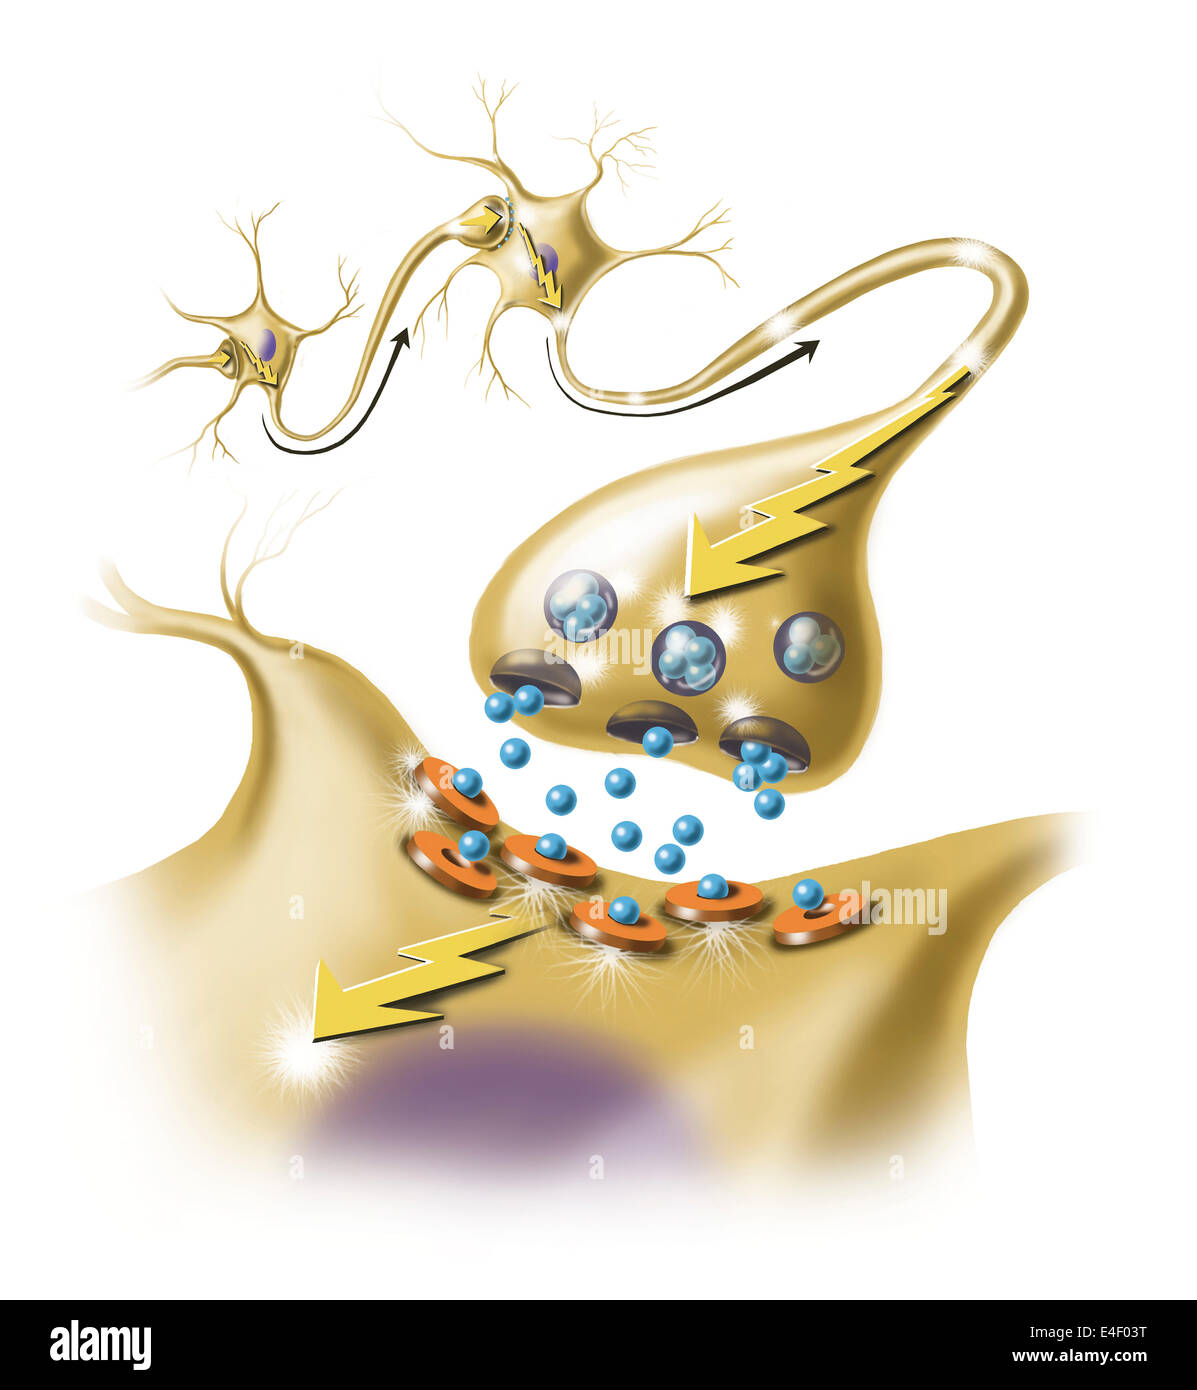 Detail of a nerve synapse showing the release of neurotransmitters. Stock Photo